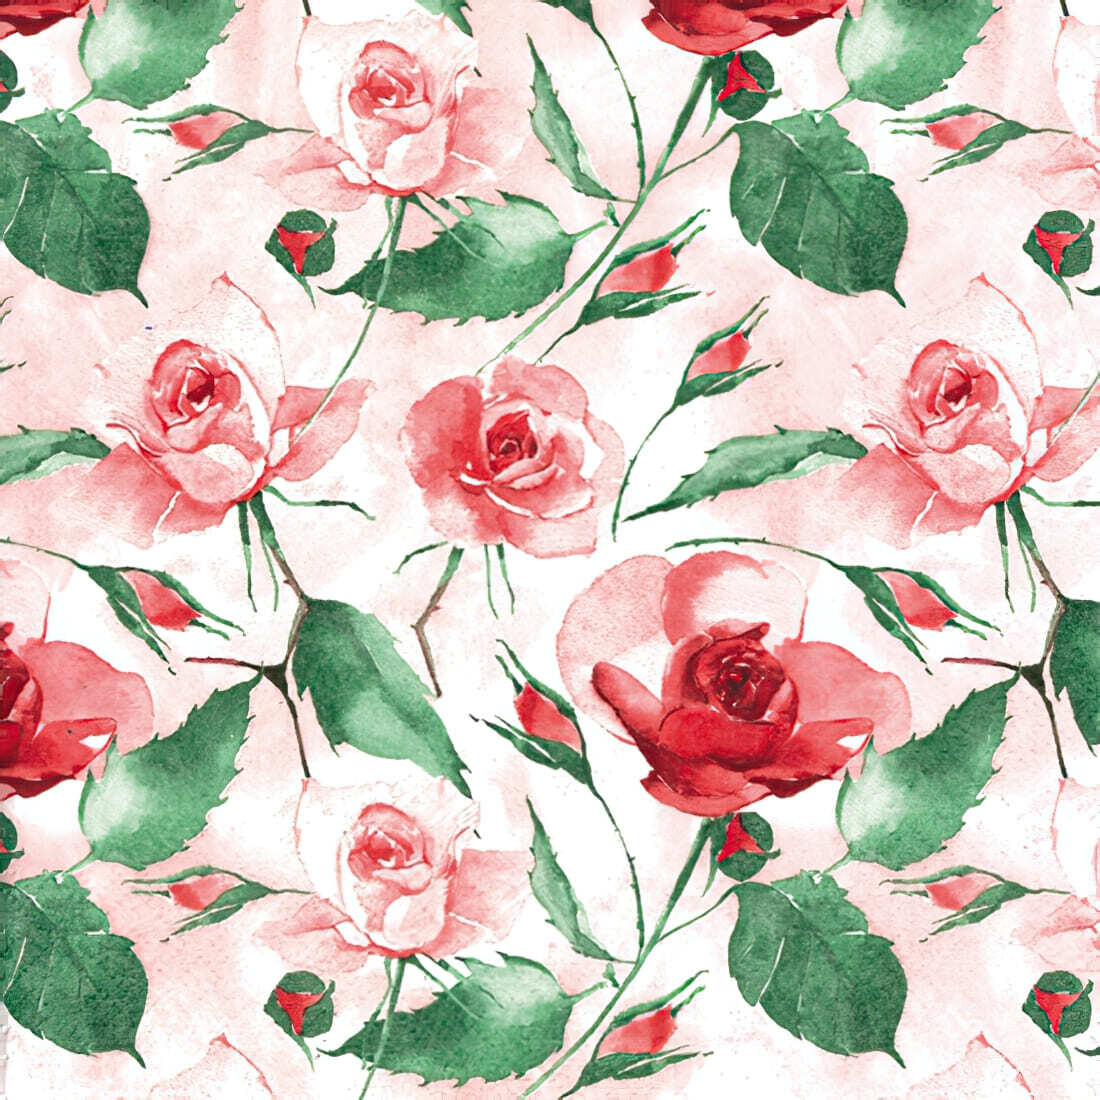 Decoupage Paper Napkins - Floral - Powdery Roses Red (1 Sheet)